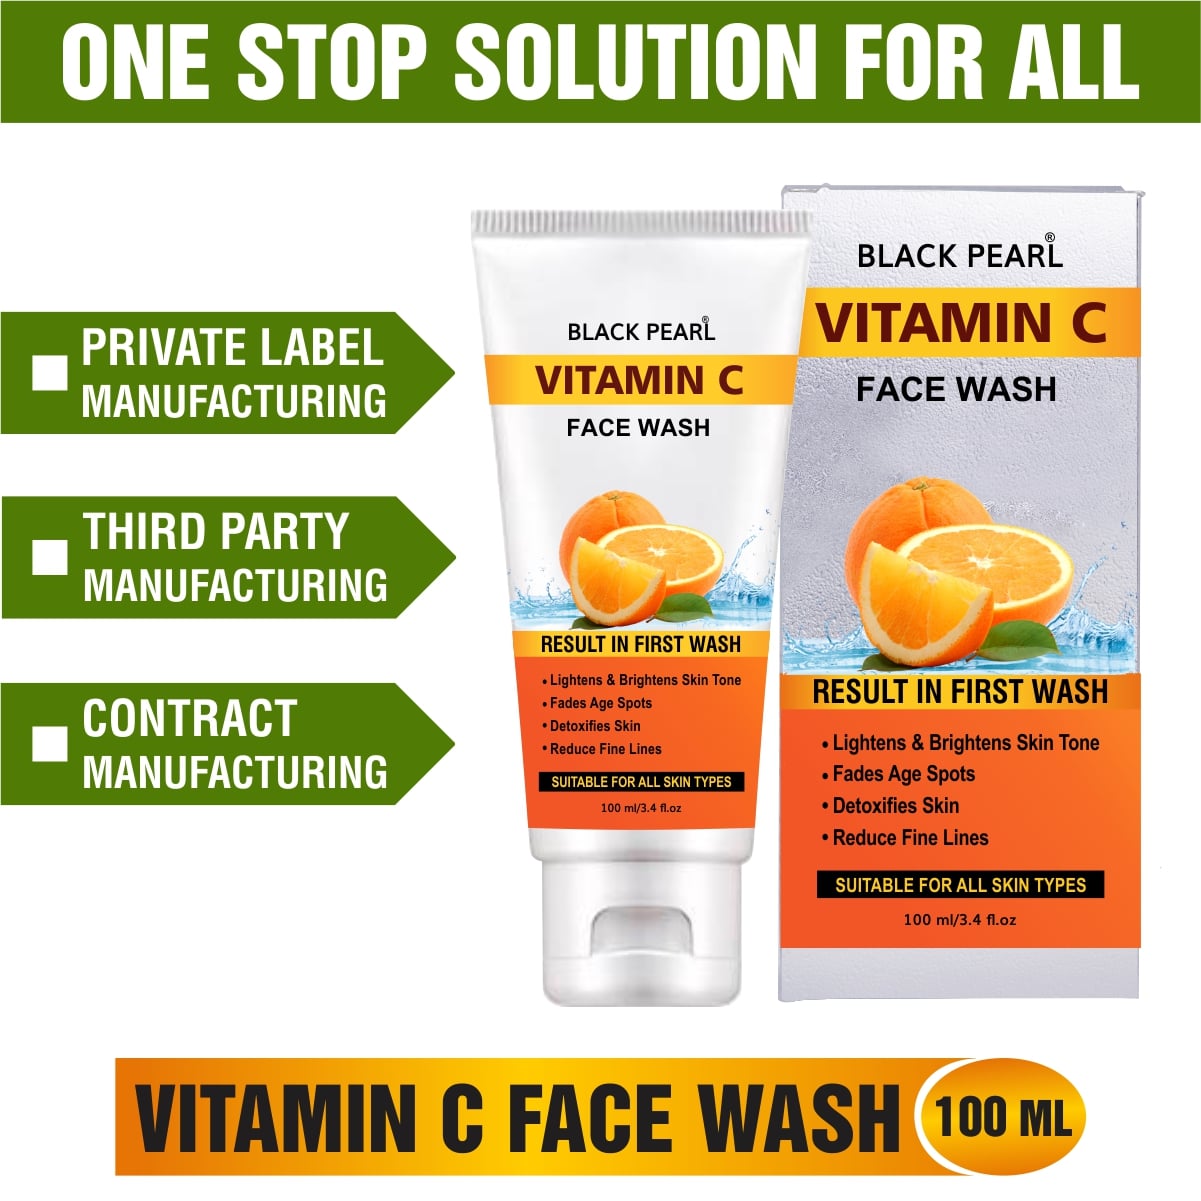 Vitamin C Face Wash one stop solution for all